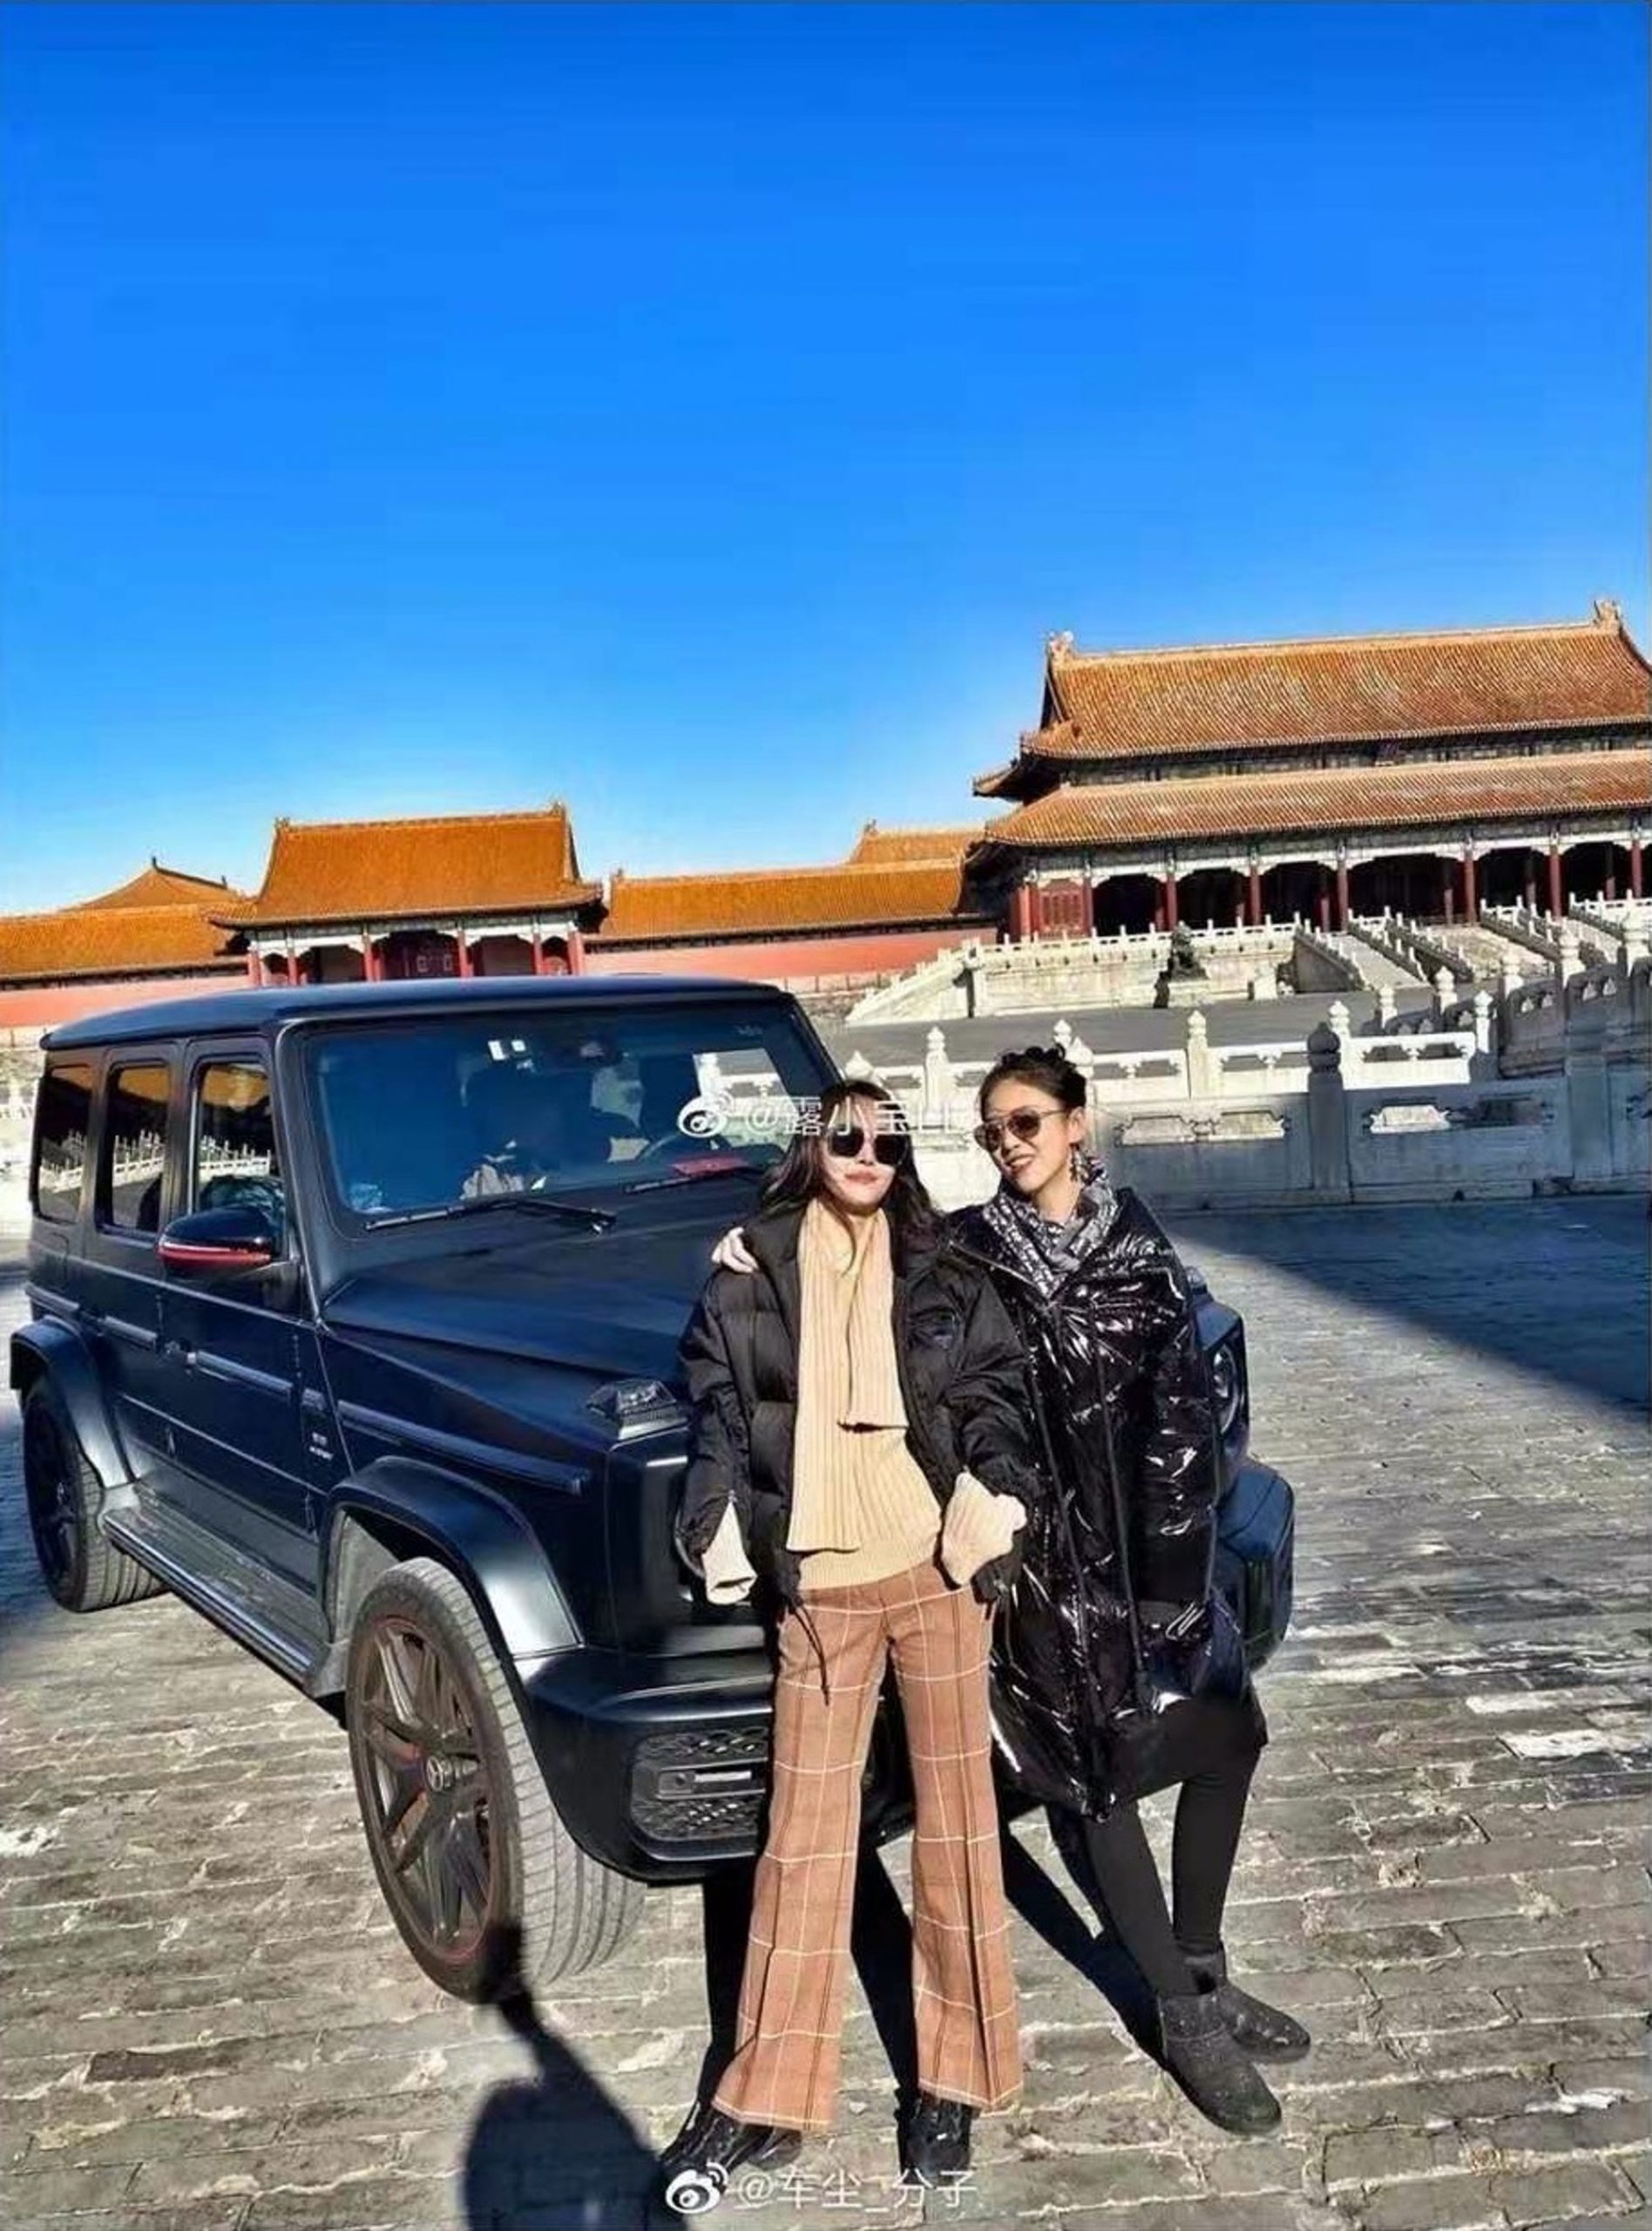 Read more about the article Outrage Over Women Posing With SUV In Forbidden City